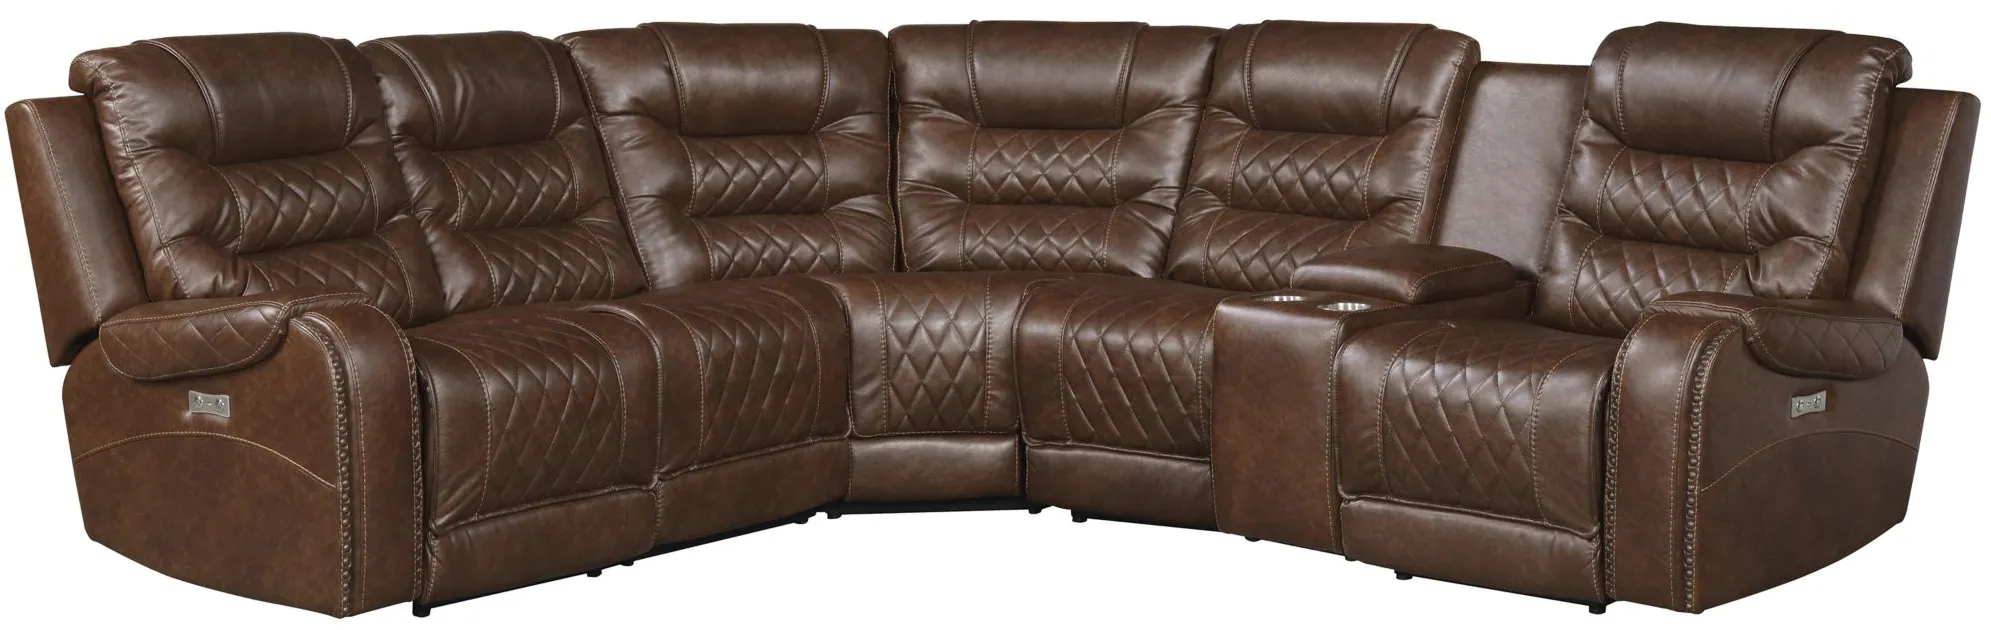 Greenway 6-pc Modular Power Reclining Sectional Sofa in Brown by Homelegance